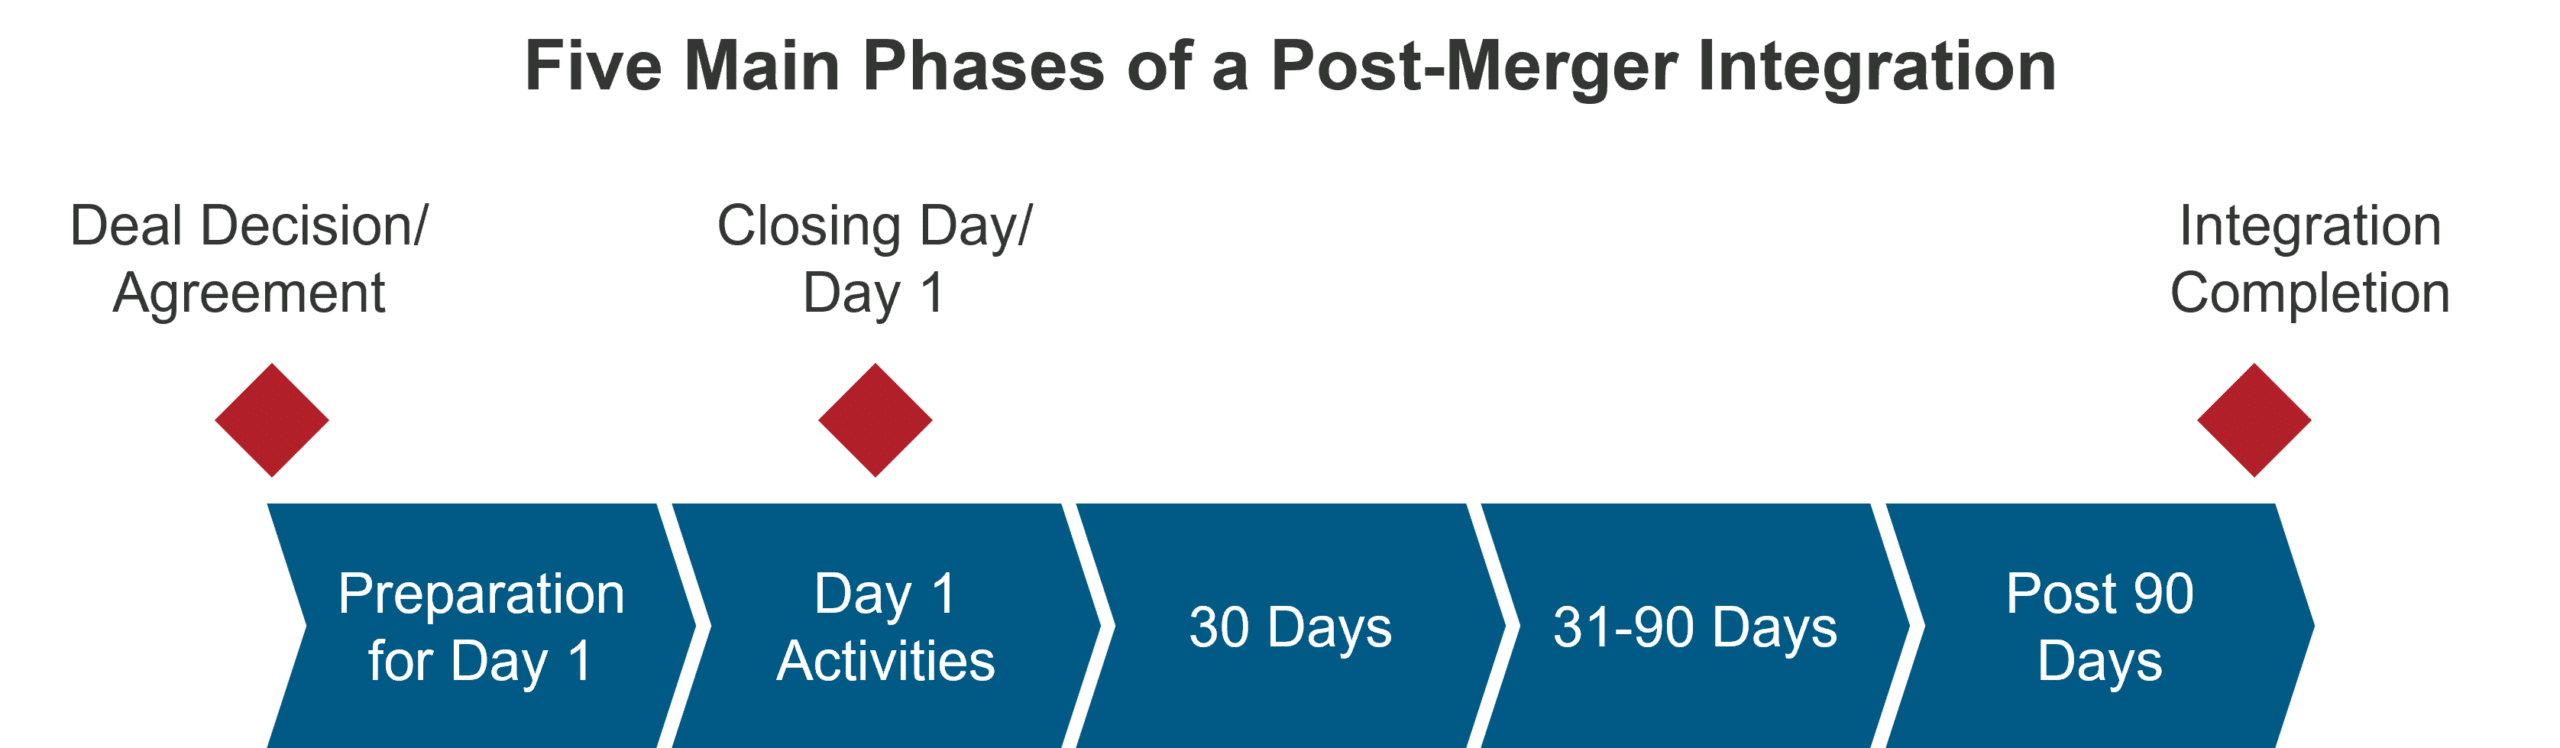 Five Main Phases of a Post-Merger Integration